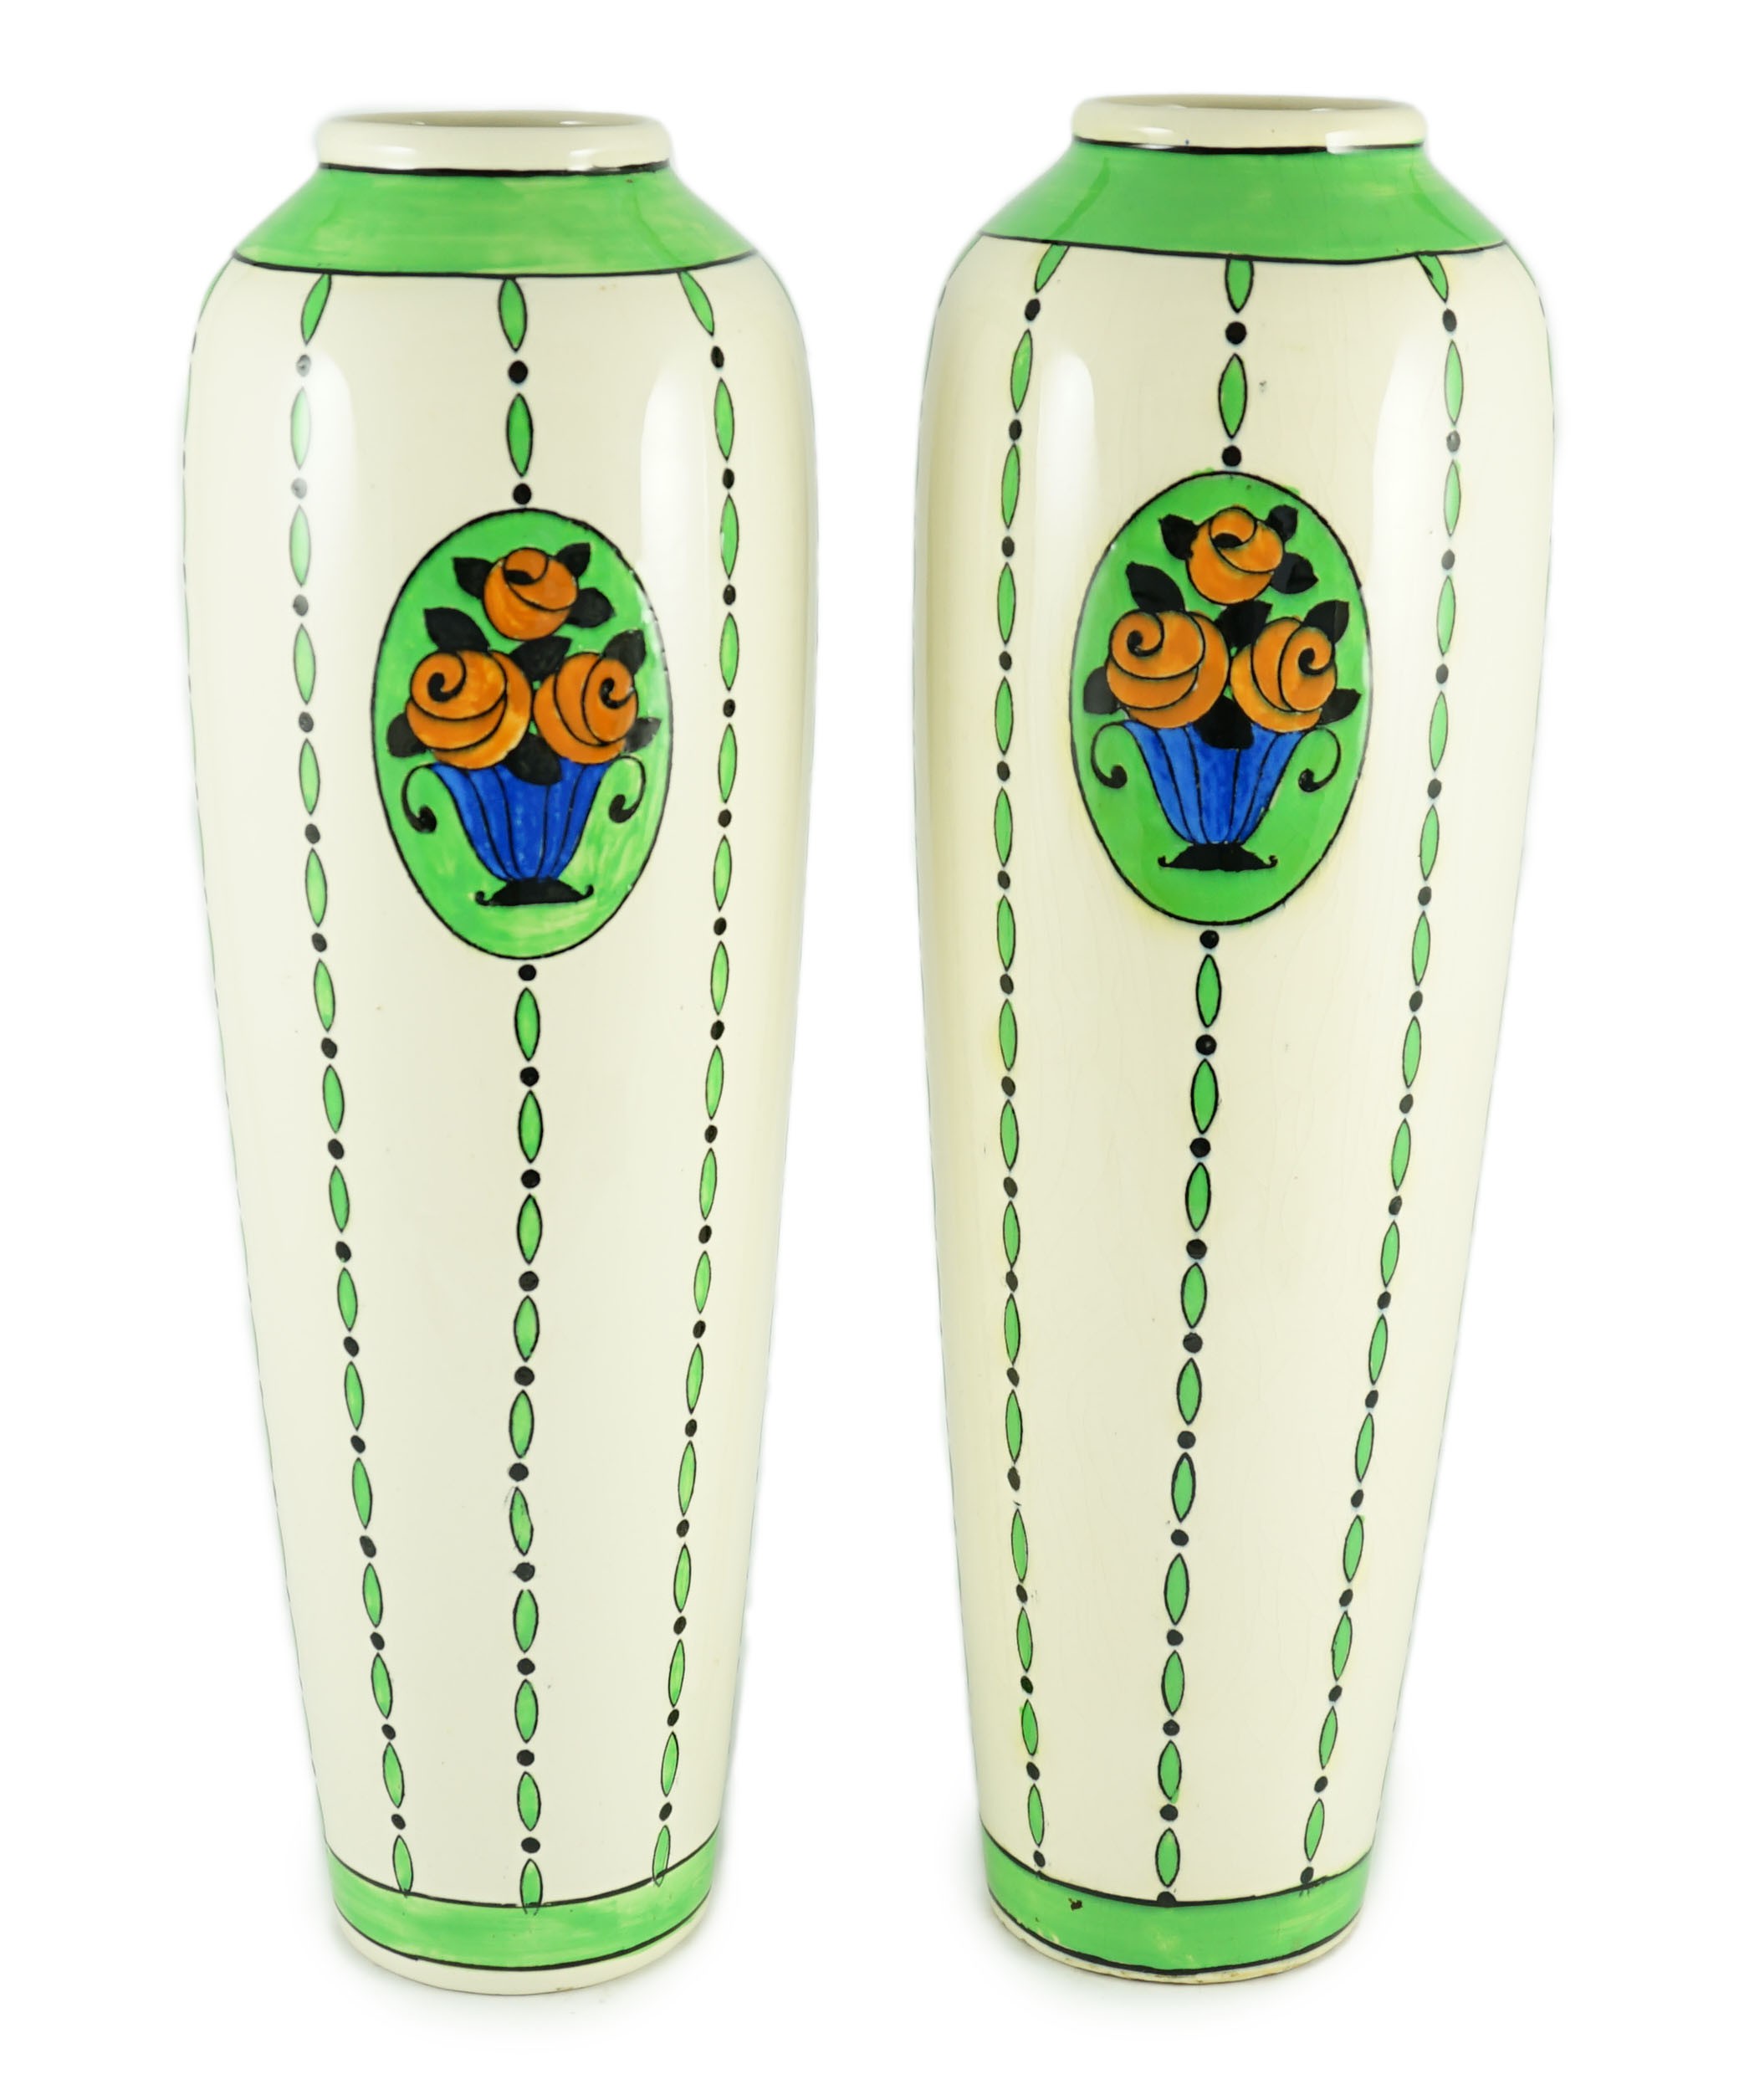 Charles Catteau for Boch Freres, a large pair of ‘Rosa’ tall vases, 45cm high